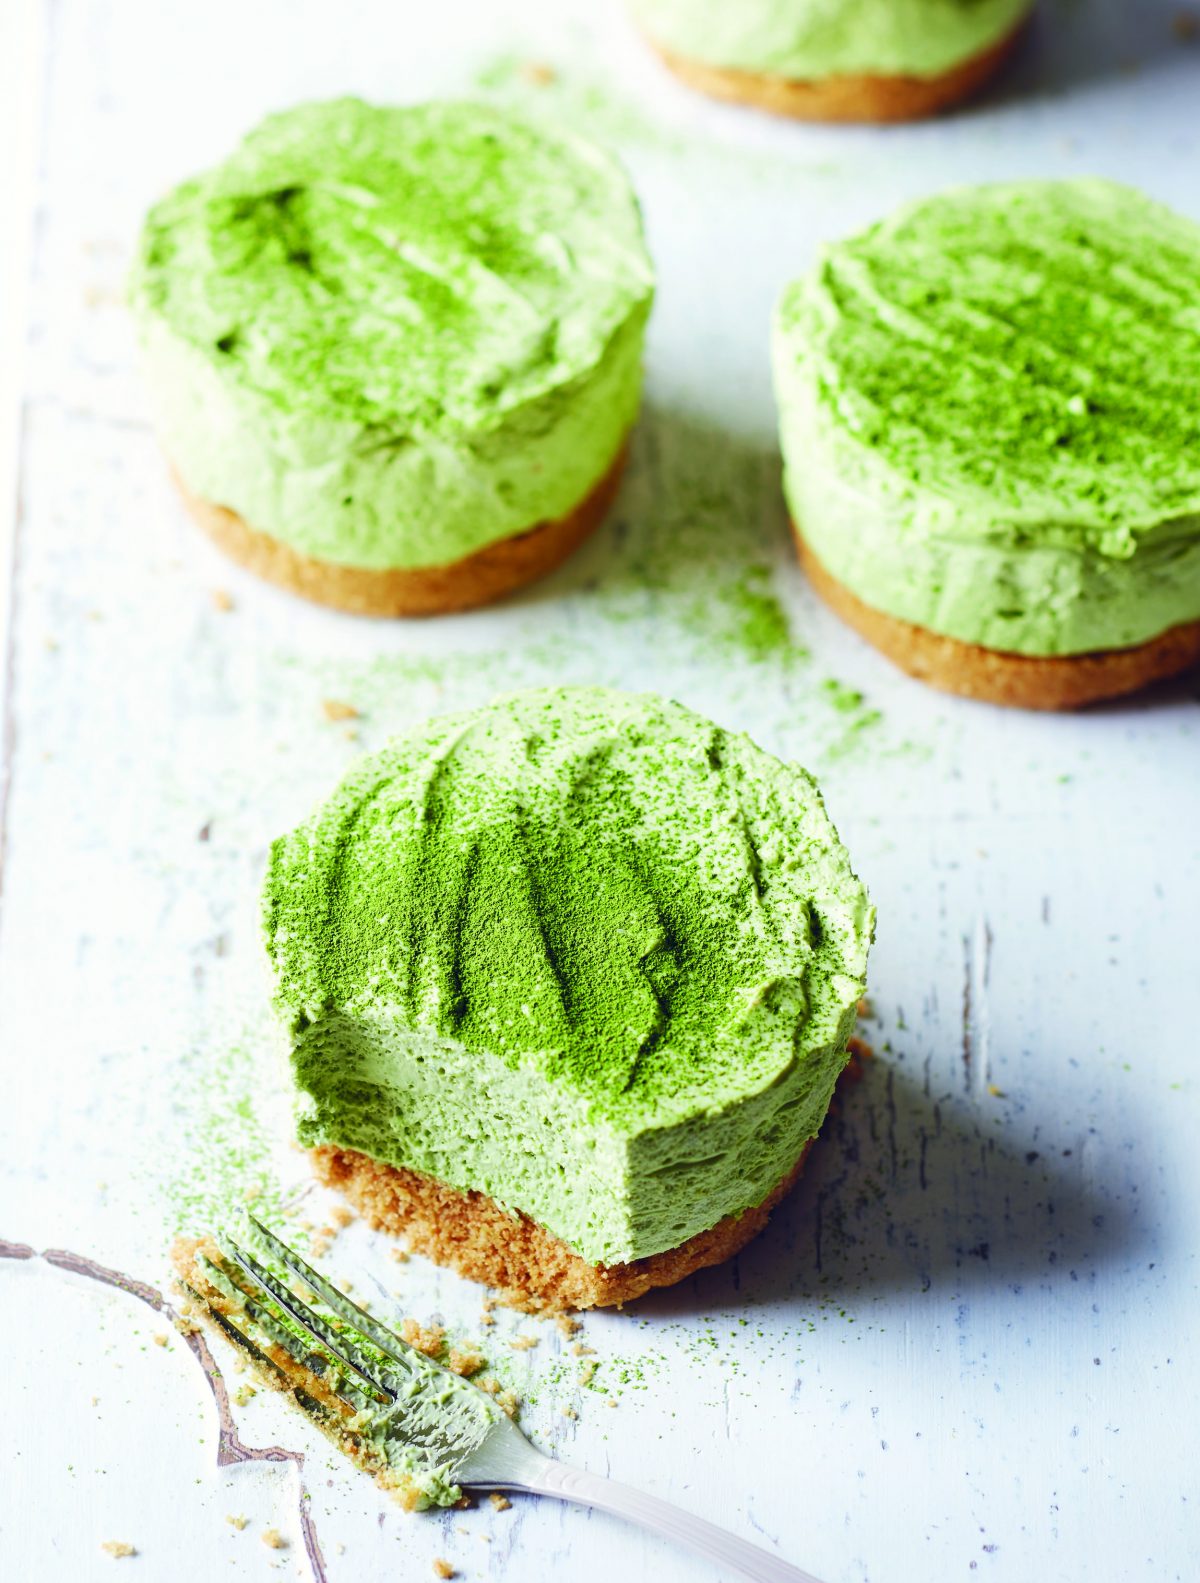 Mini Matcha Cheesecakes Recipe From ‘The Book of Matcha’ | The Epoch Times